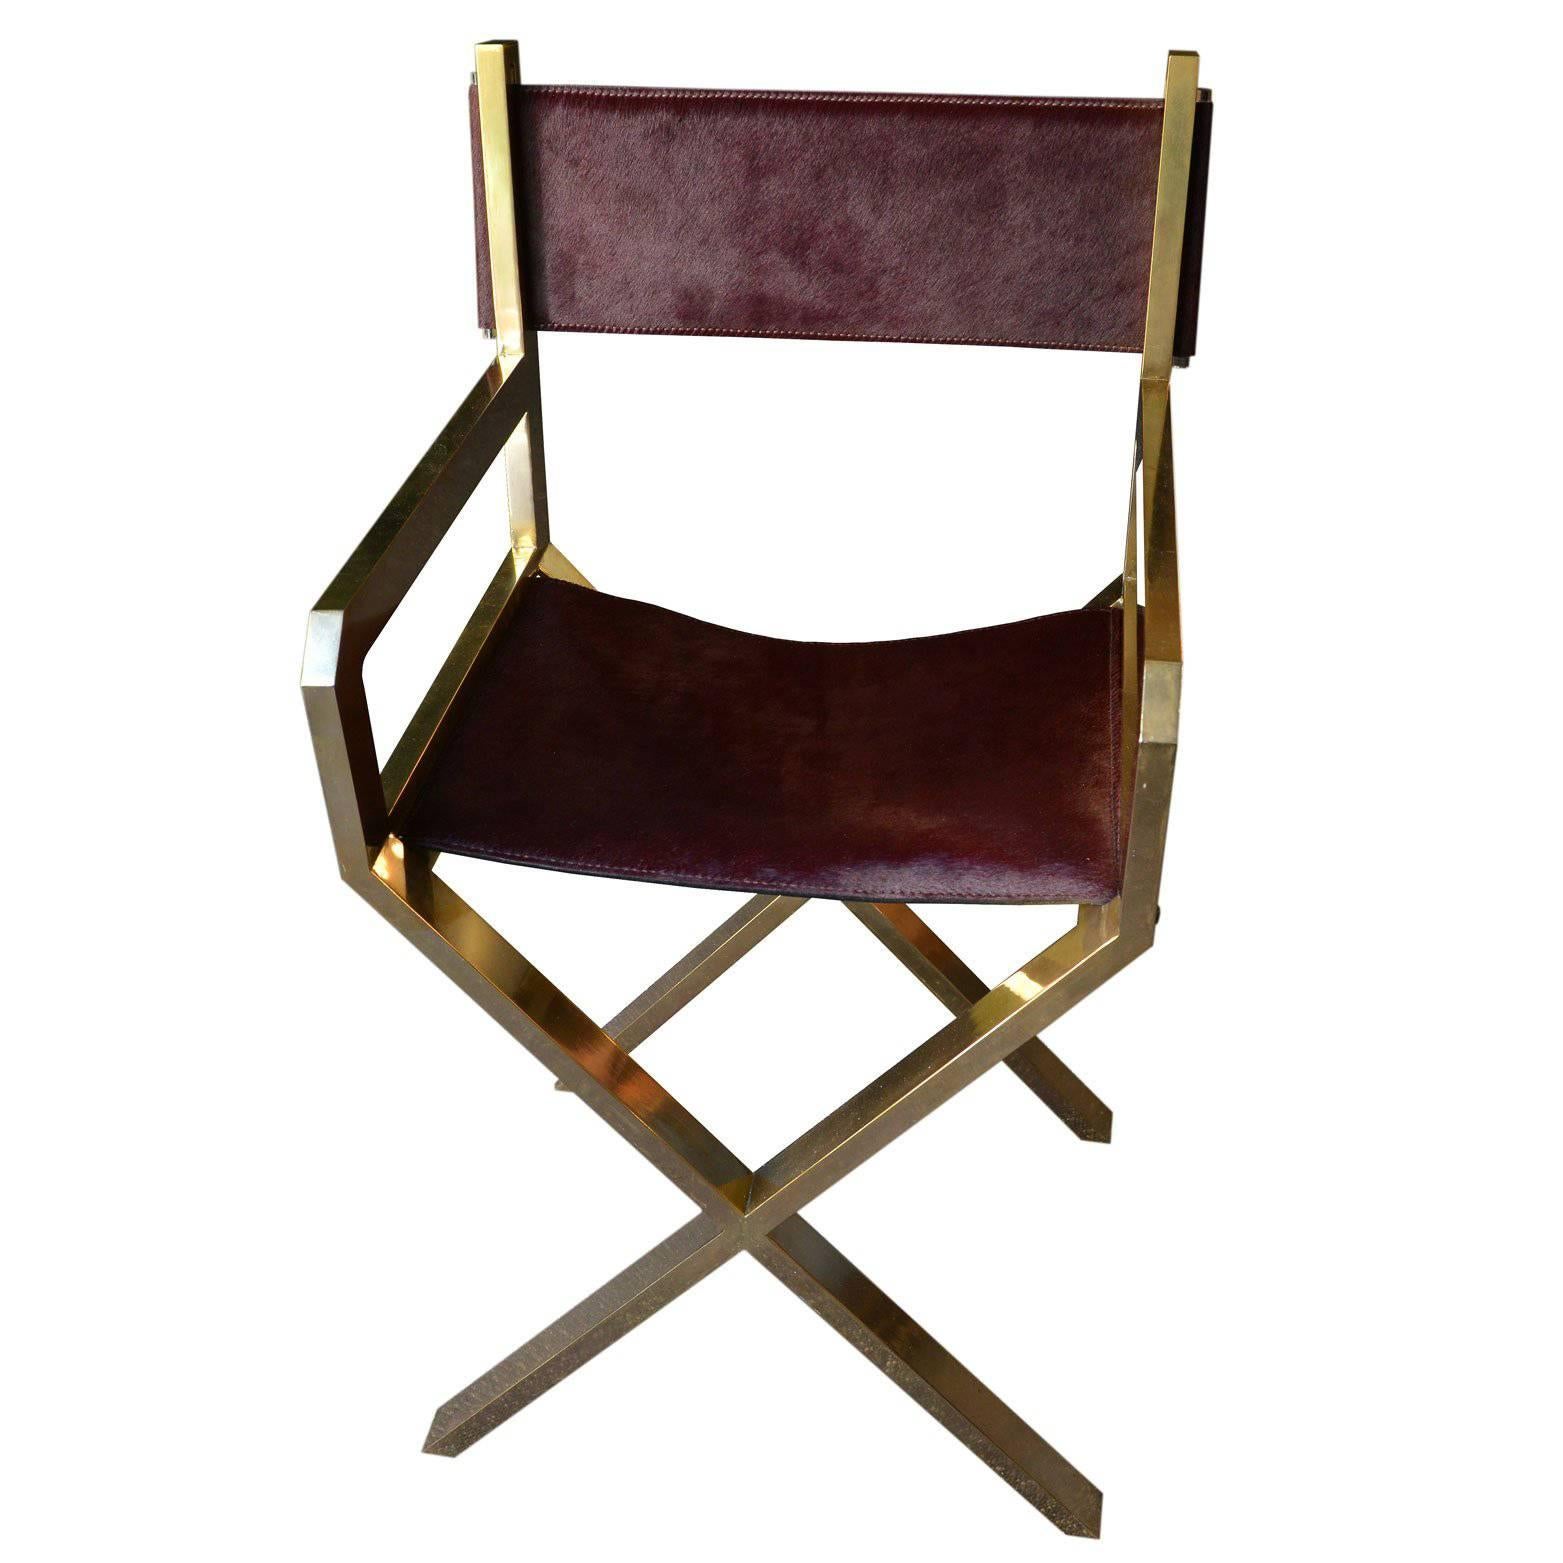 Director's Chair in Brass and Purple Calf Leather, France, Late 1970s For Sale